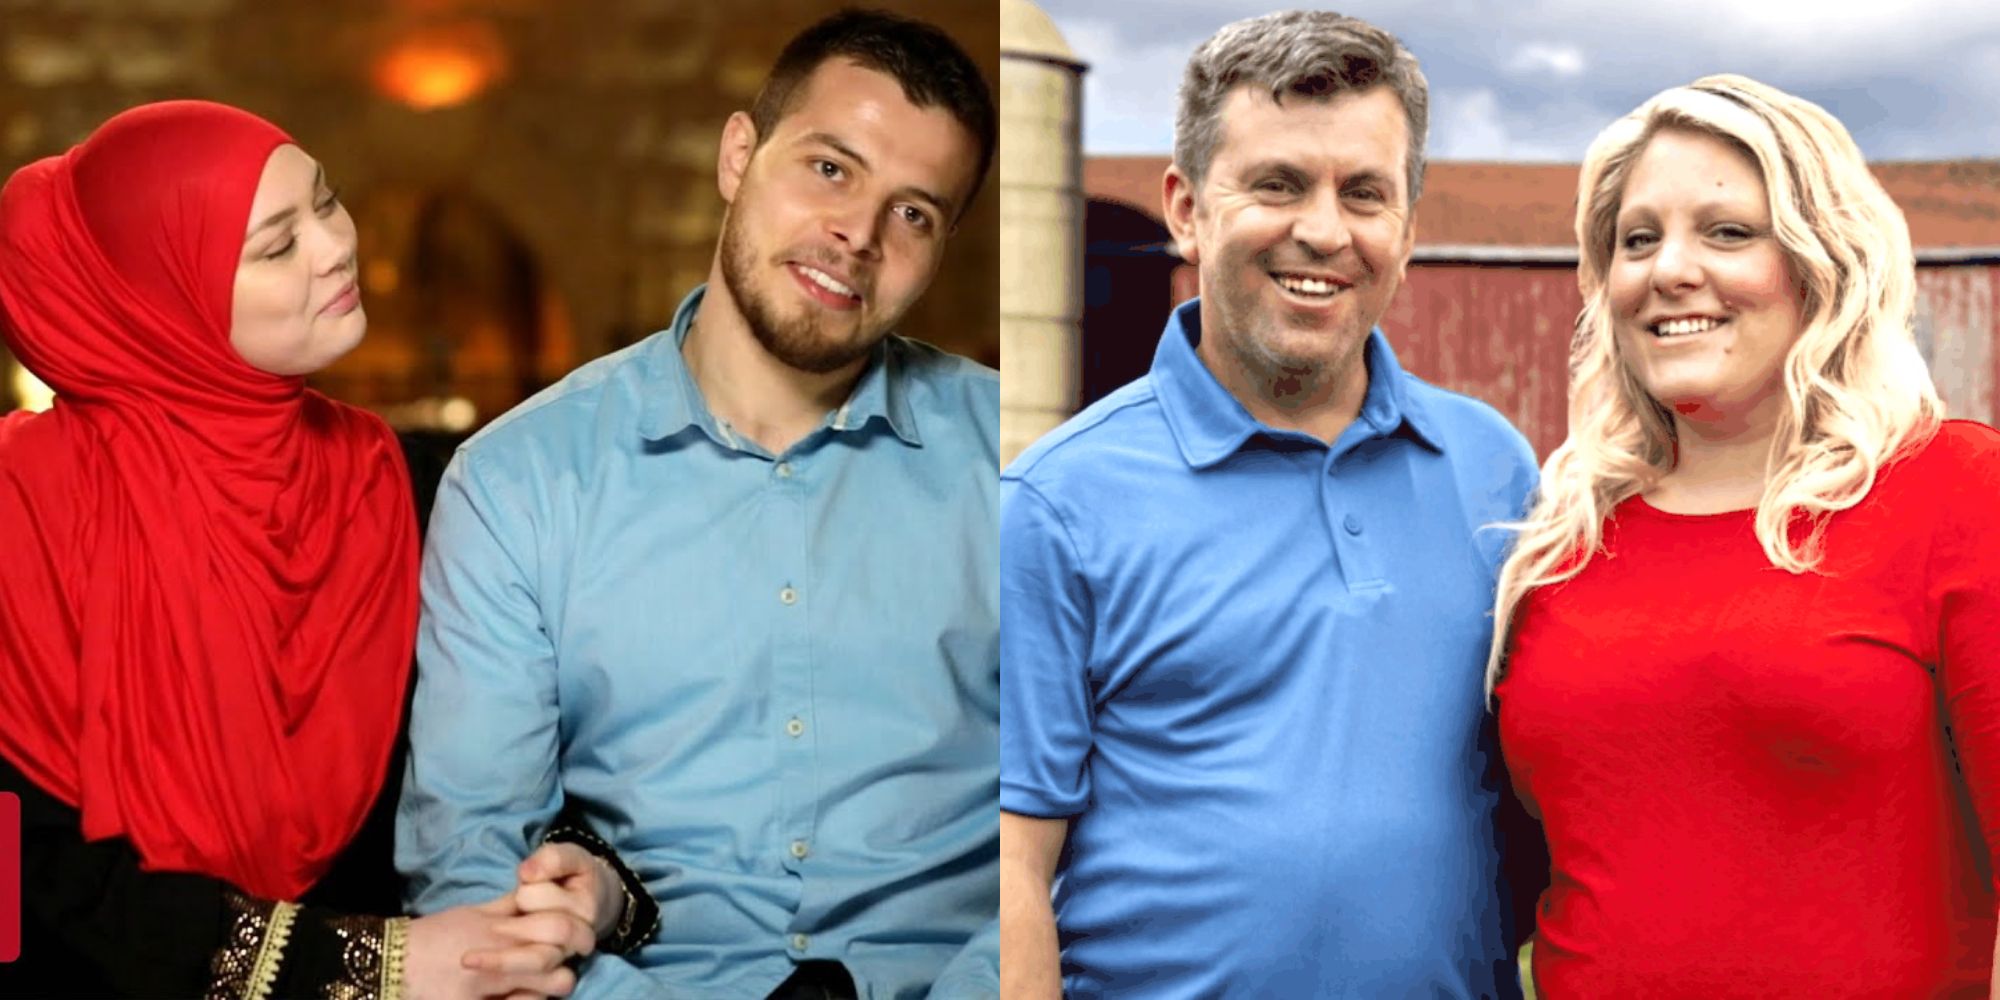 Split image showing Avery and Omar and Anna and Mursel in 90 Day Fiancé.